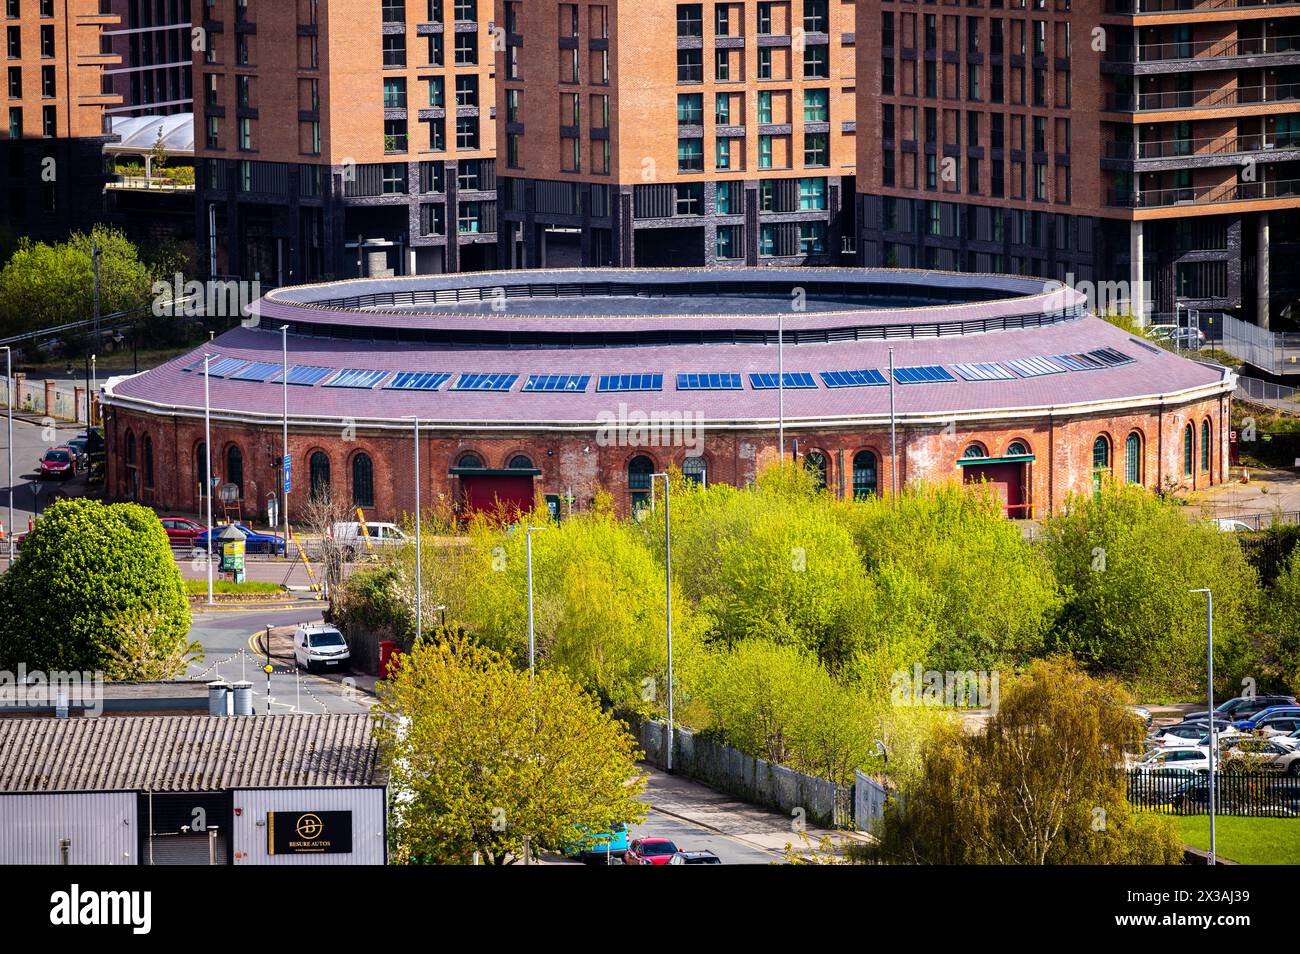 The Grade II listed Roundhouse building in Leeds that used to house Steam Locomotives, will soon be converted into a Padel Tennis Centre. Stock Photo